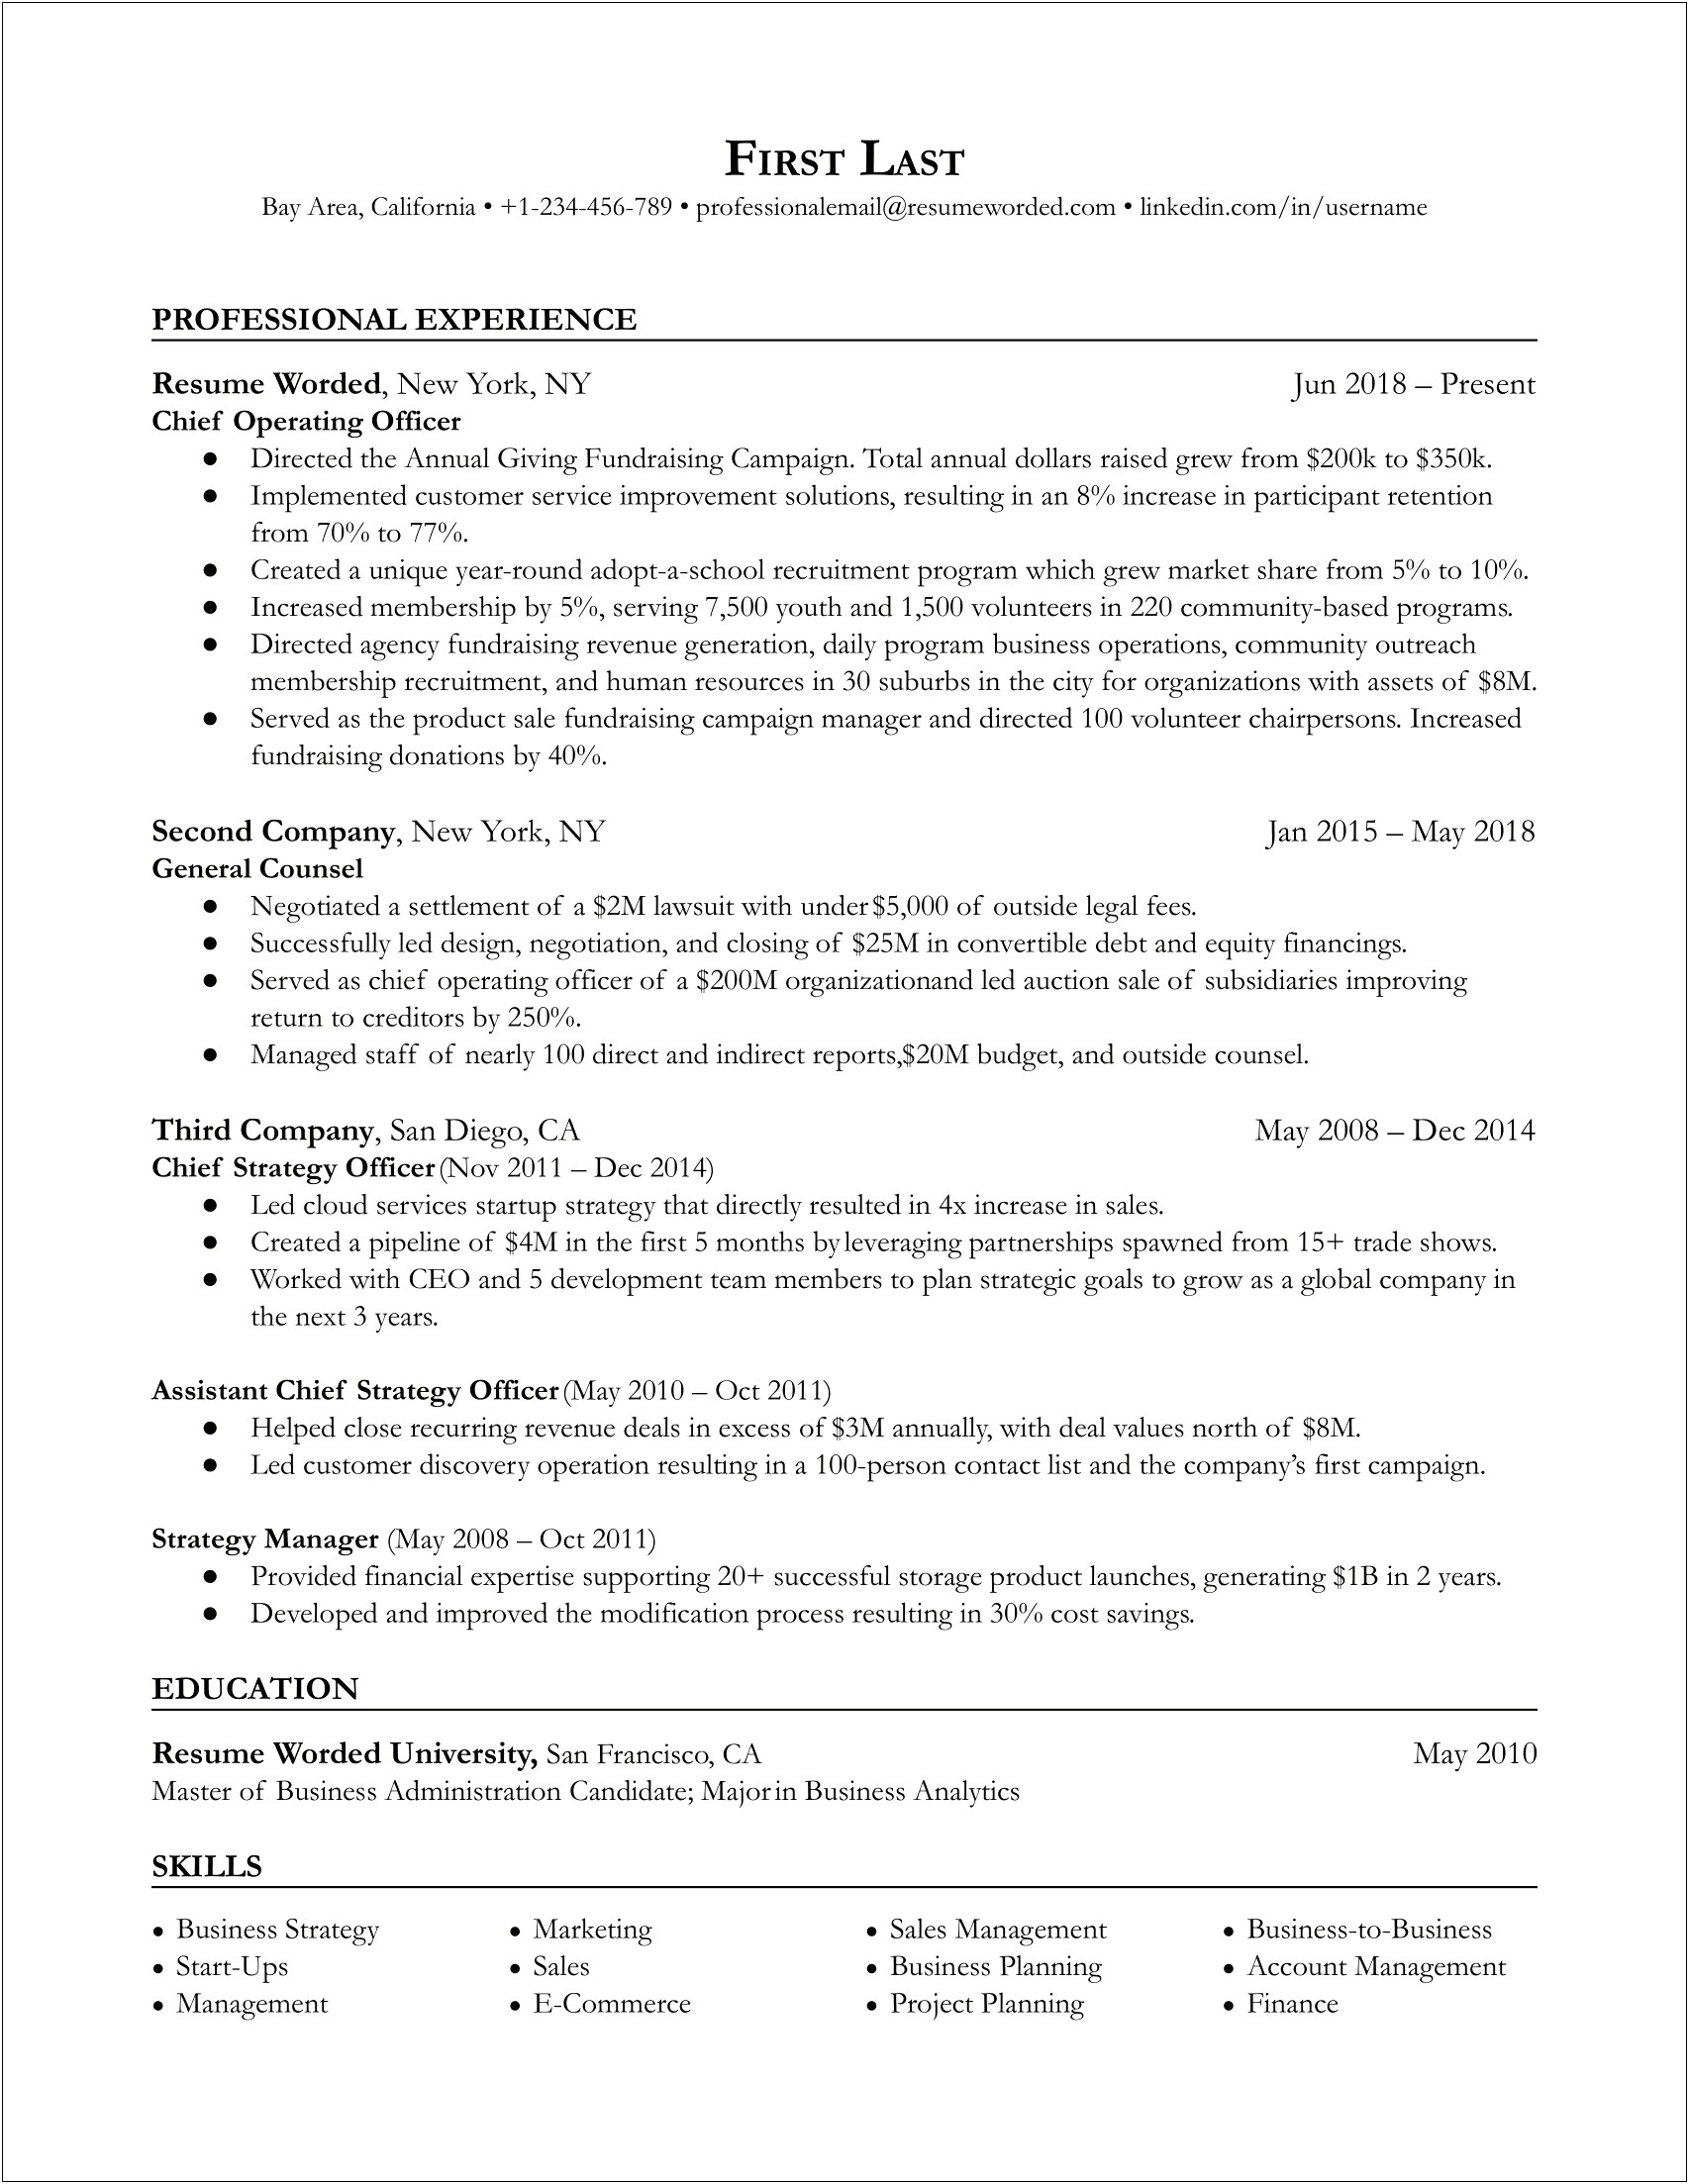 Area Of Professional Expertise Examples For Resume